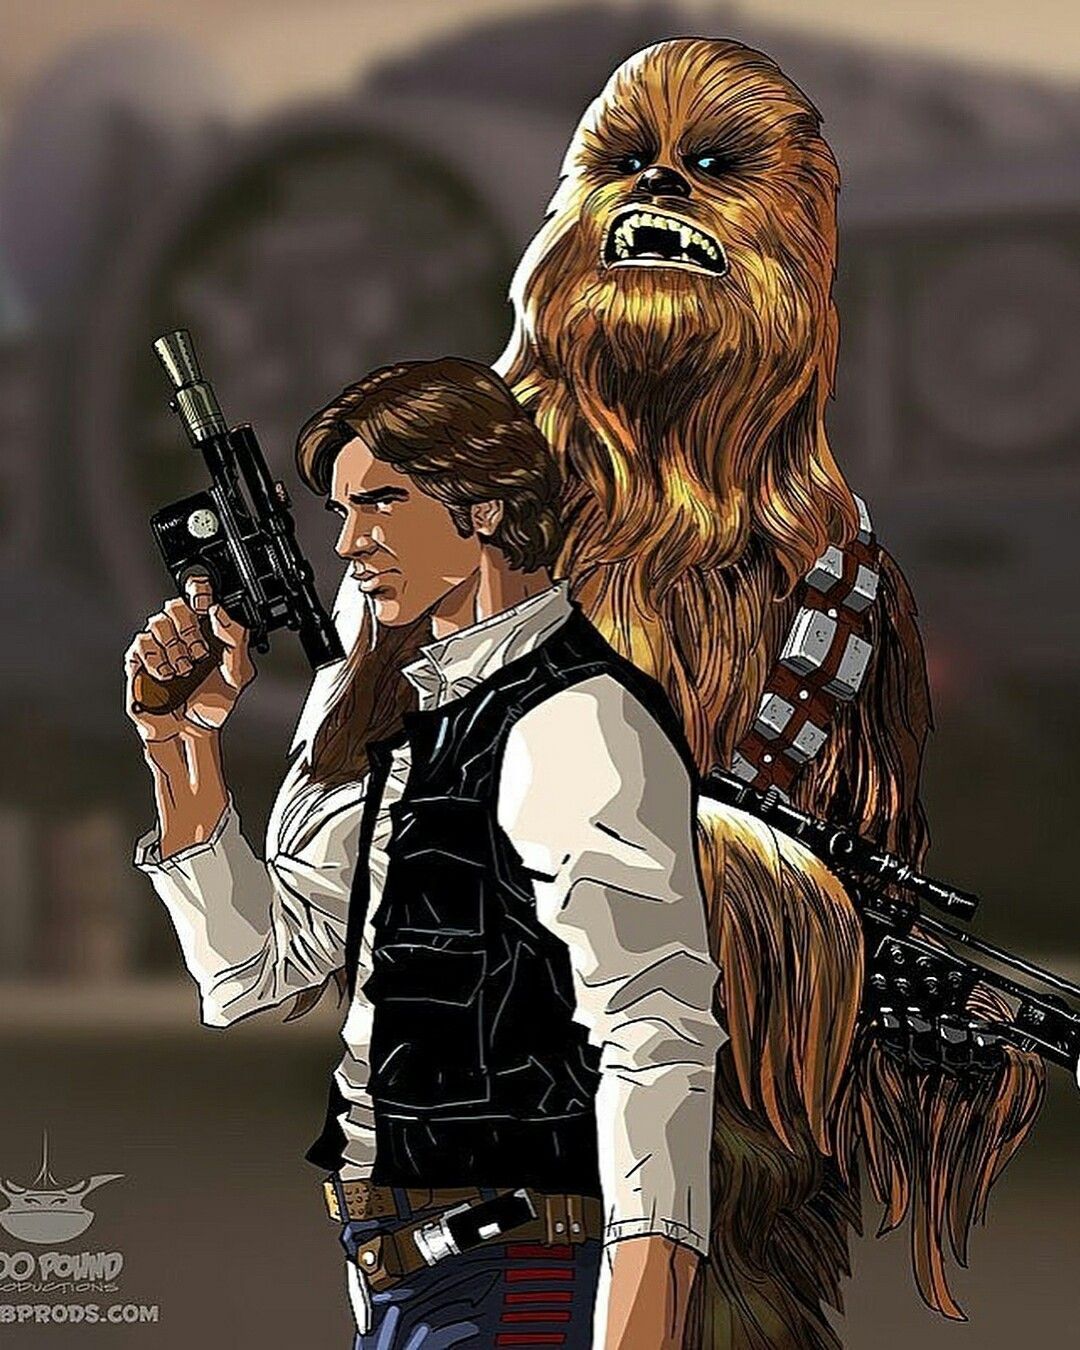 Star Wars: Han Solo and Chewbacca. Star wars picture, Star wars